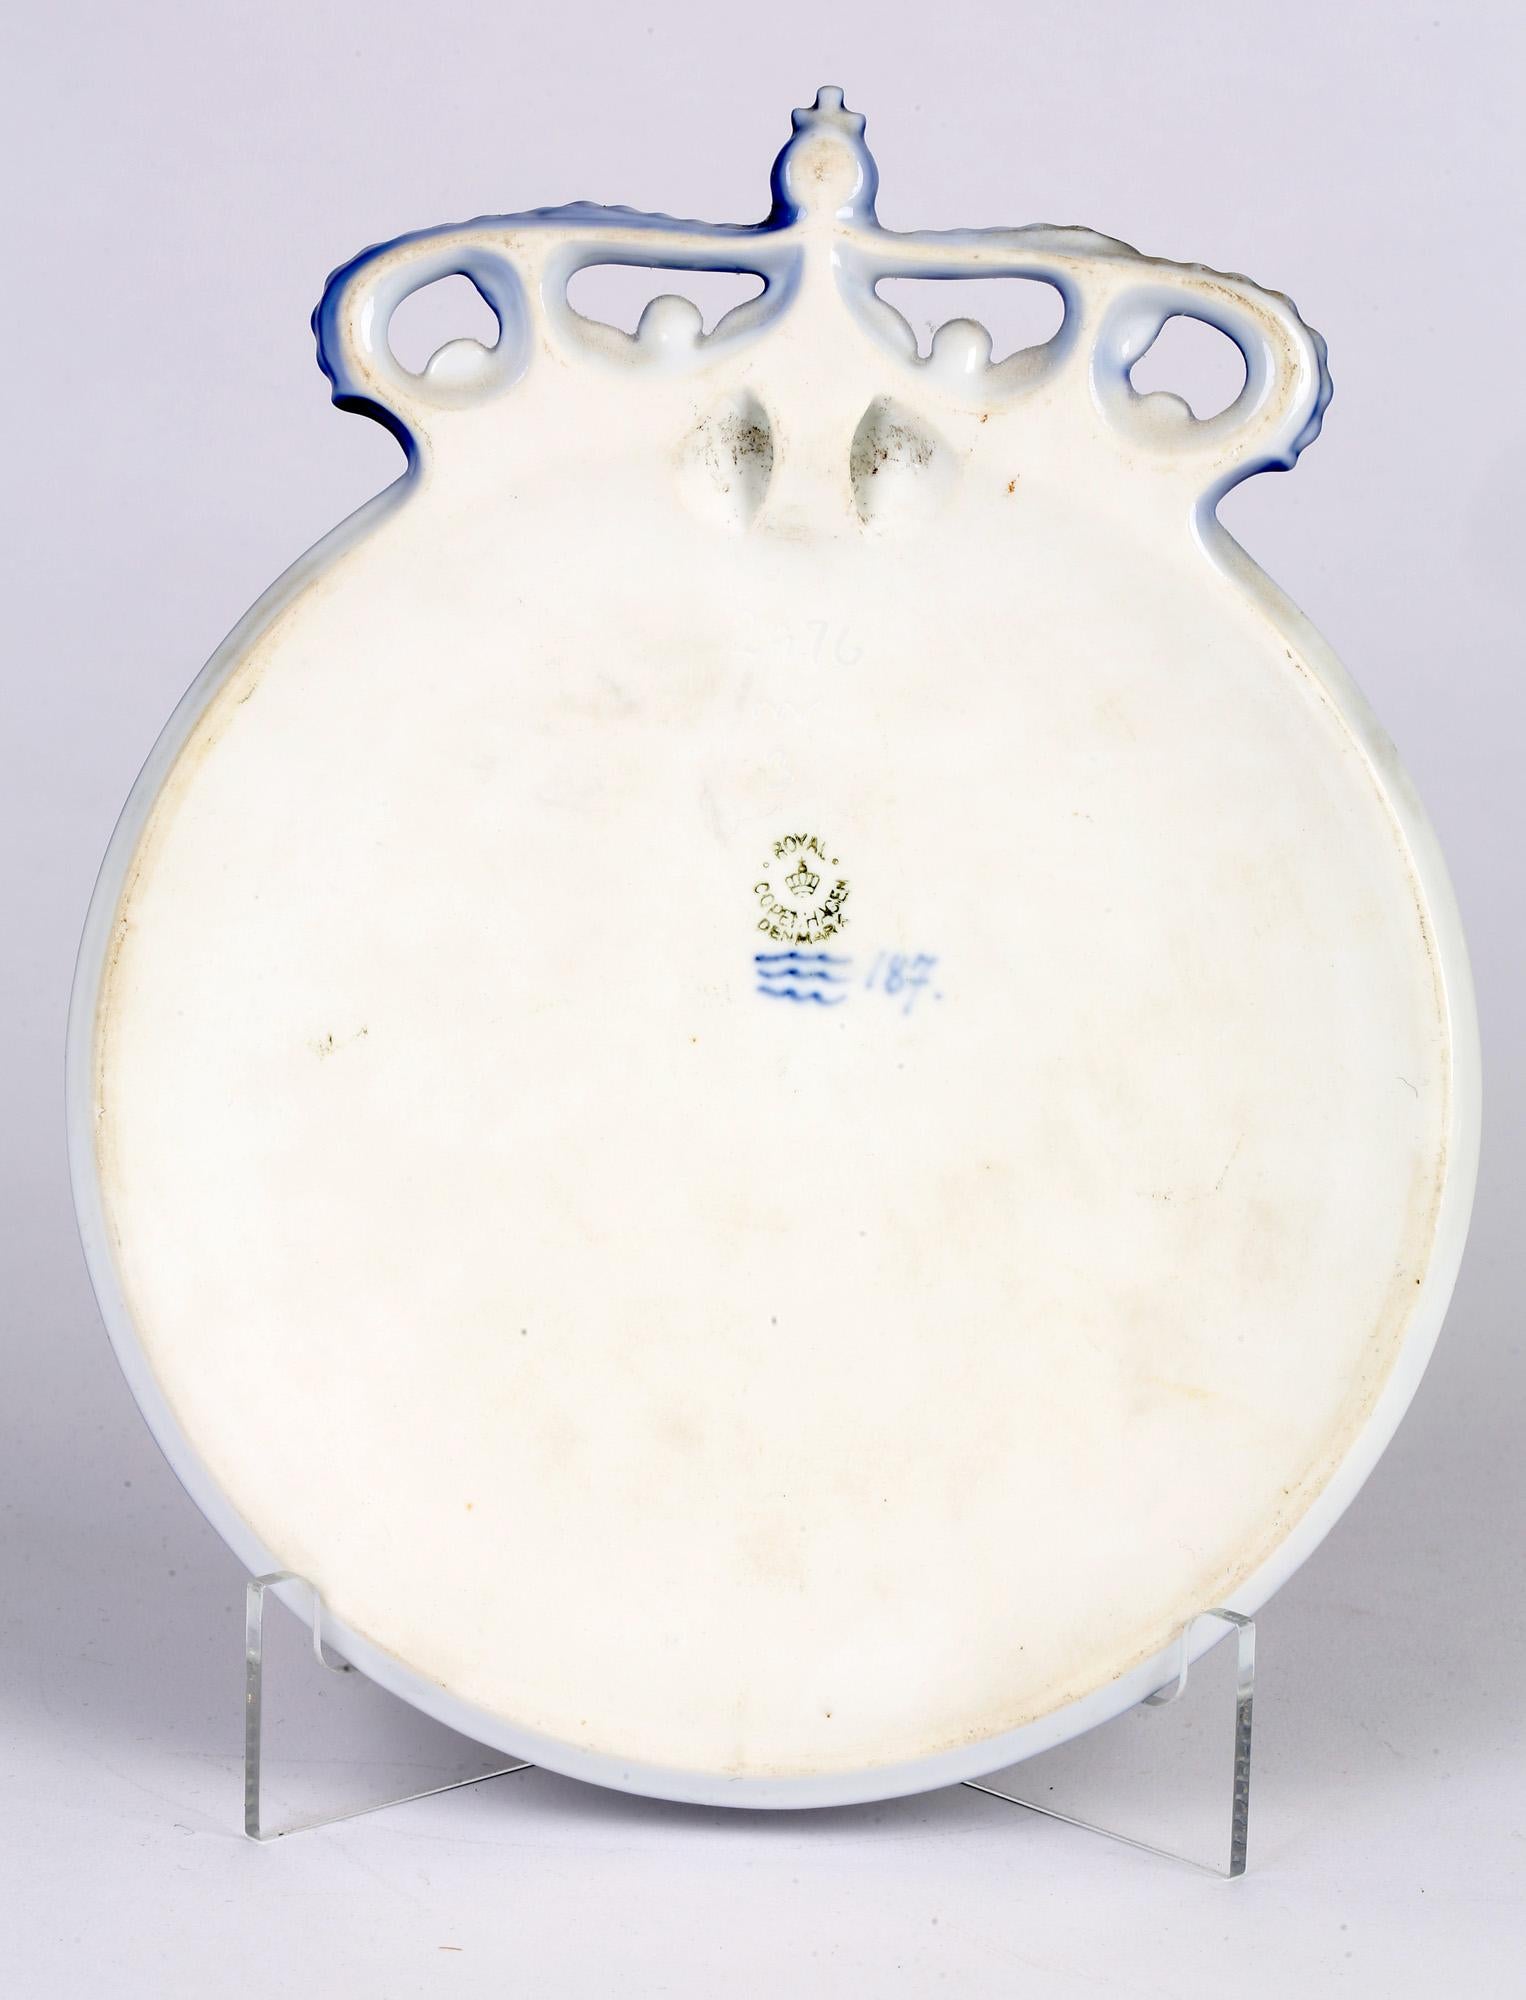 An unusual and scarce Danish porcelain commemorative plaque made by Royal Copenhagen and made between 1893 and 1928. The plaque is of rounded shape with a slightly domed front with a molded crown to the top edge and set within a molded raised bead